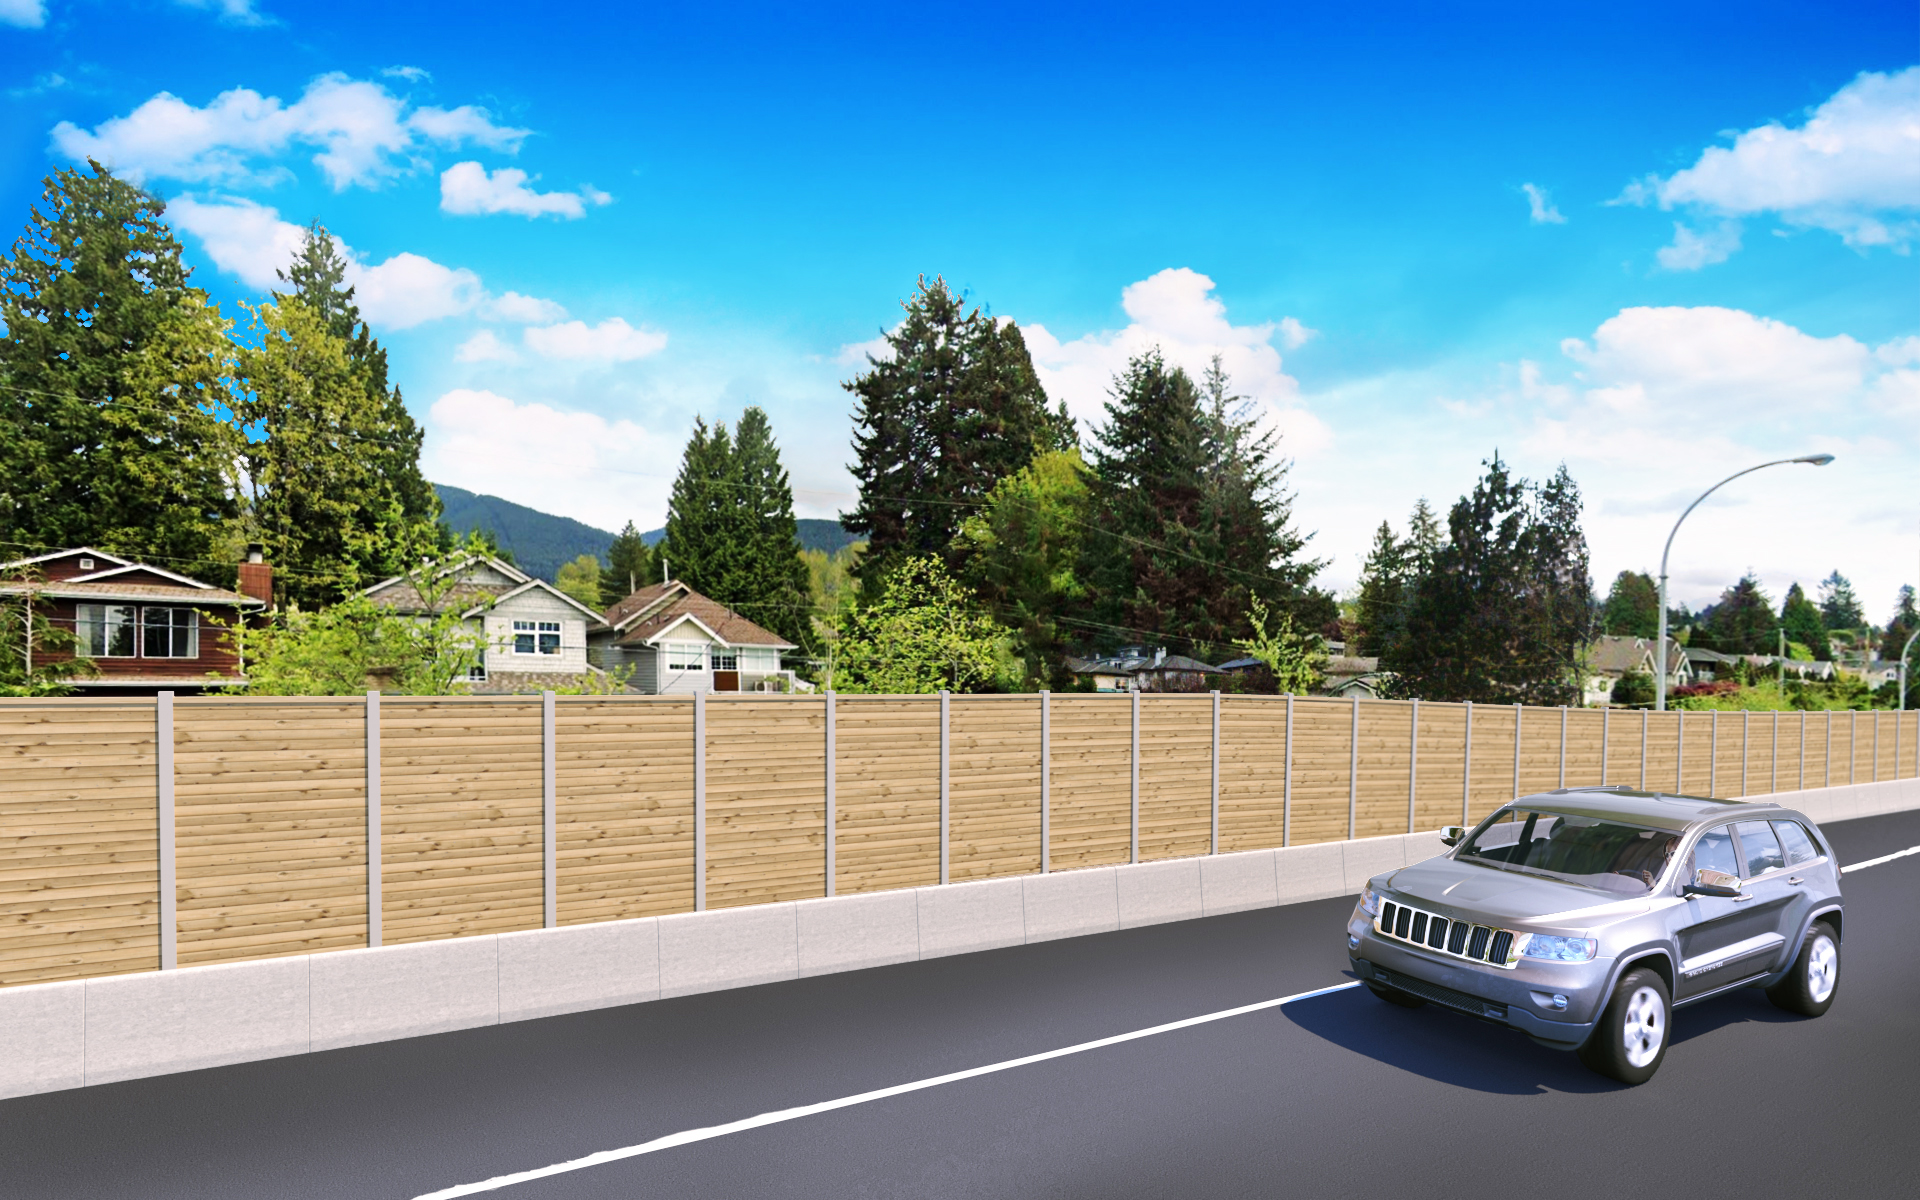 3d rendering of a car driving on the highway with soundshield fencing separating the road from the neighbourhood